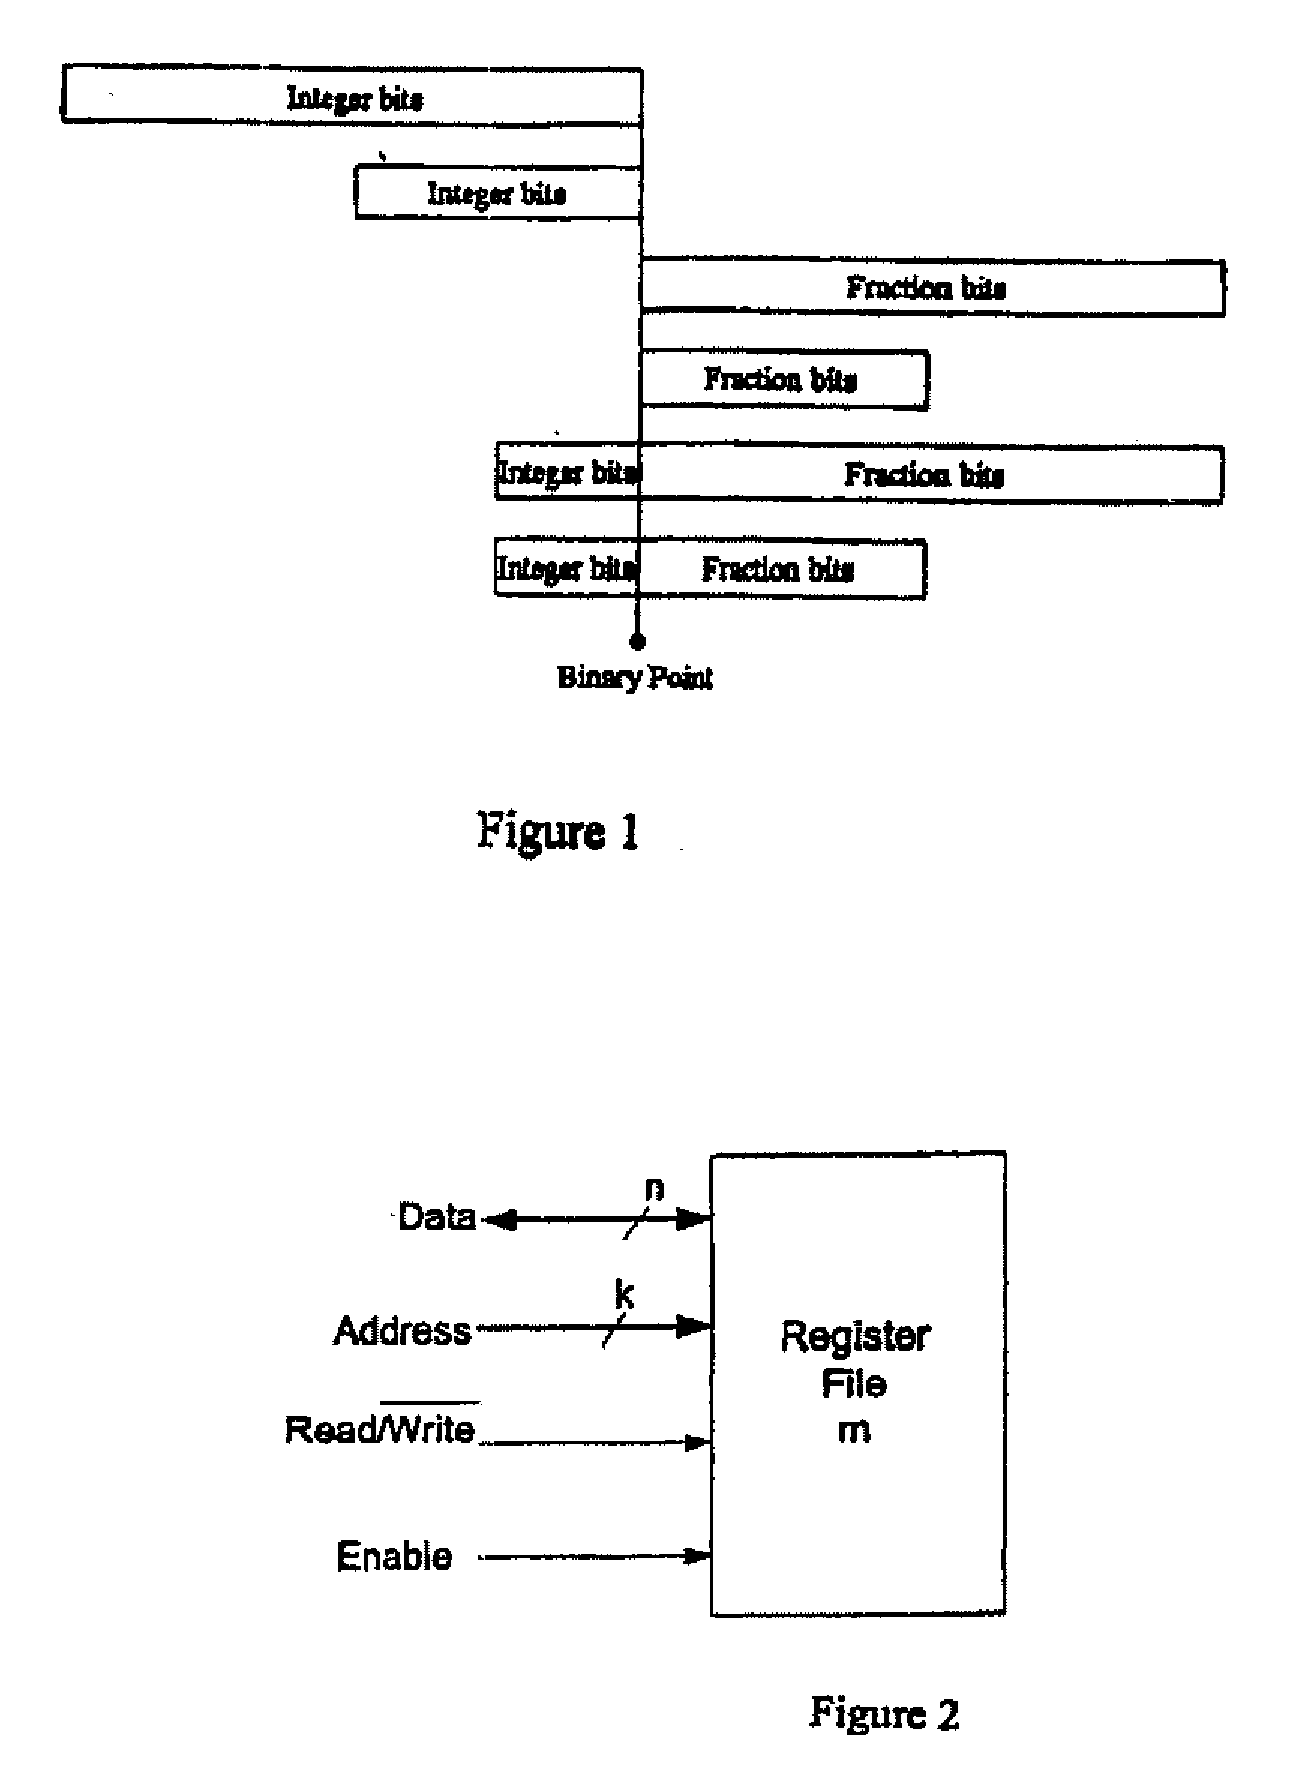 Data file storing multiple data types with controlled data access